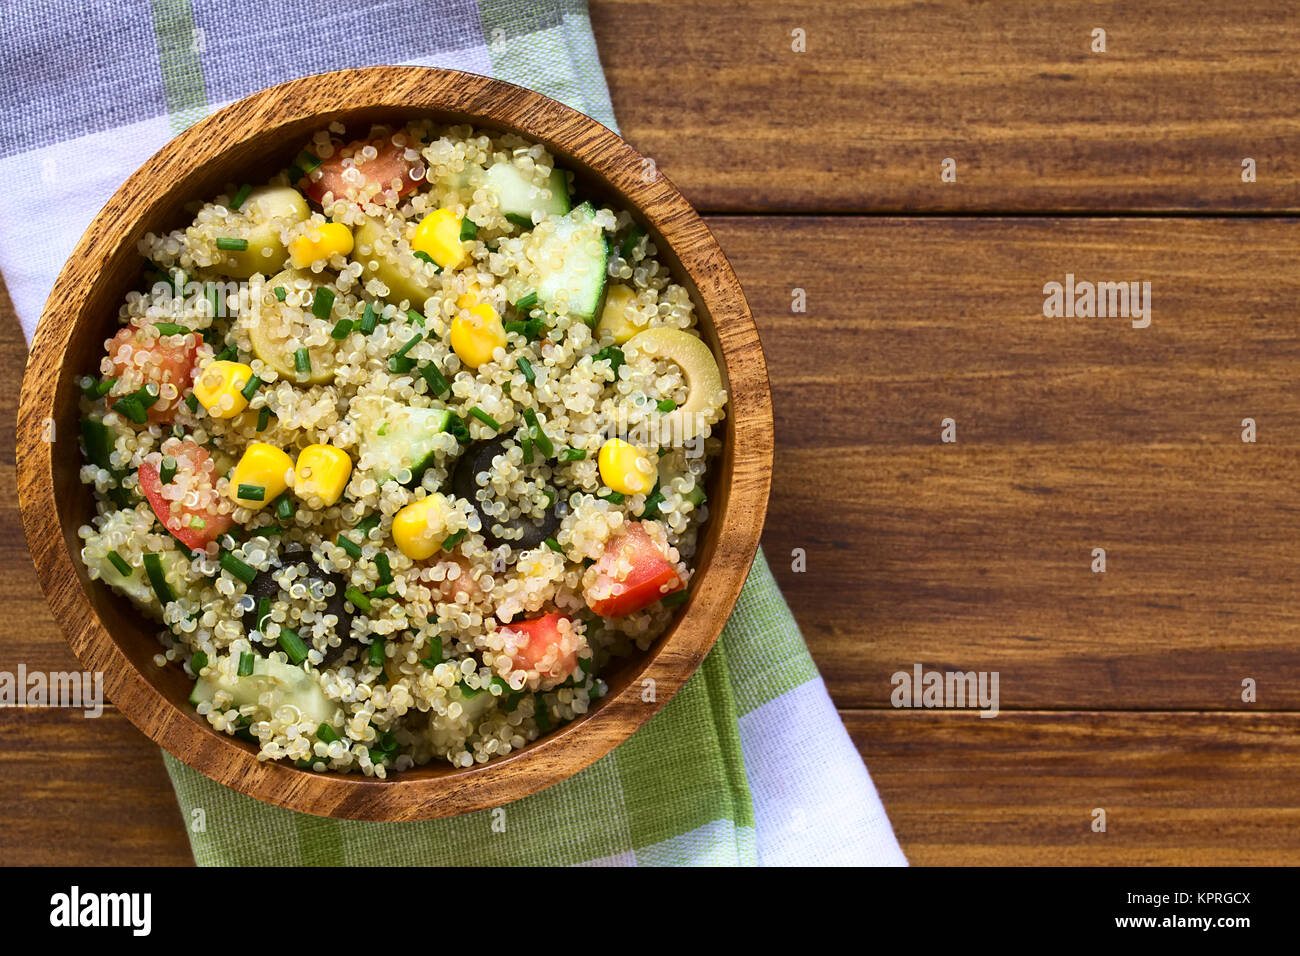 Colorful Quinoa and Vegetable Salad Stock Photo